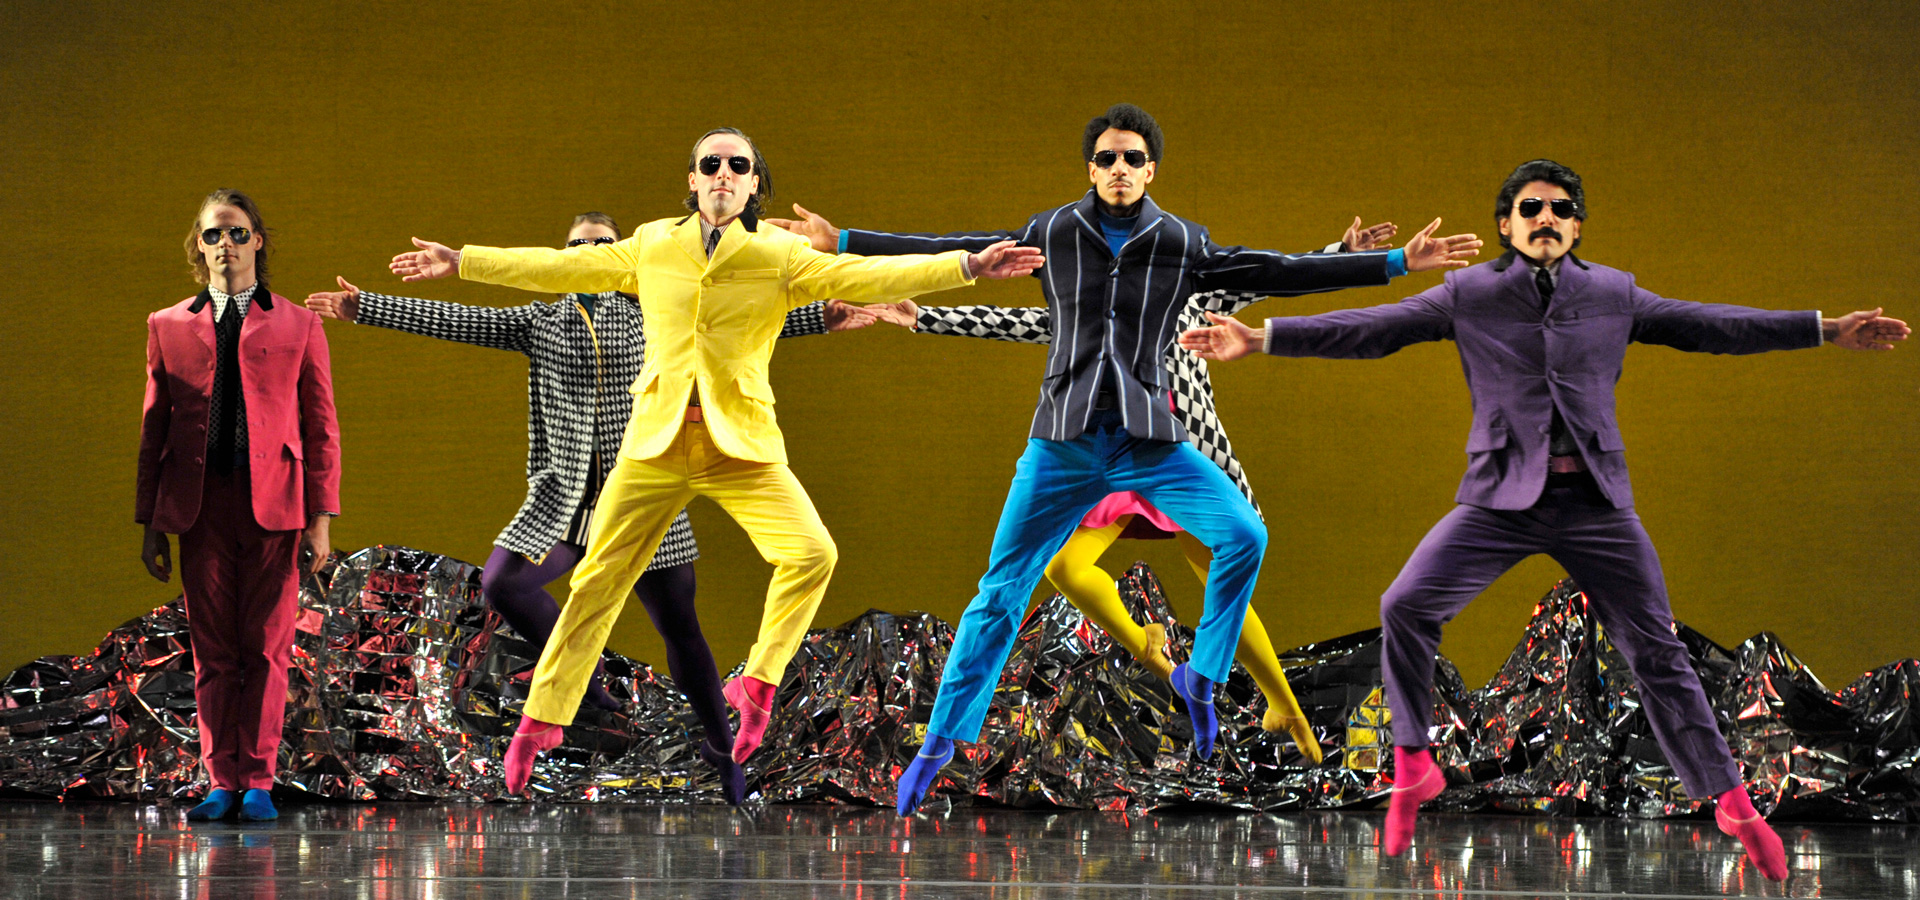 Dancers performing Pepperland jump in the air with their arms extended.